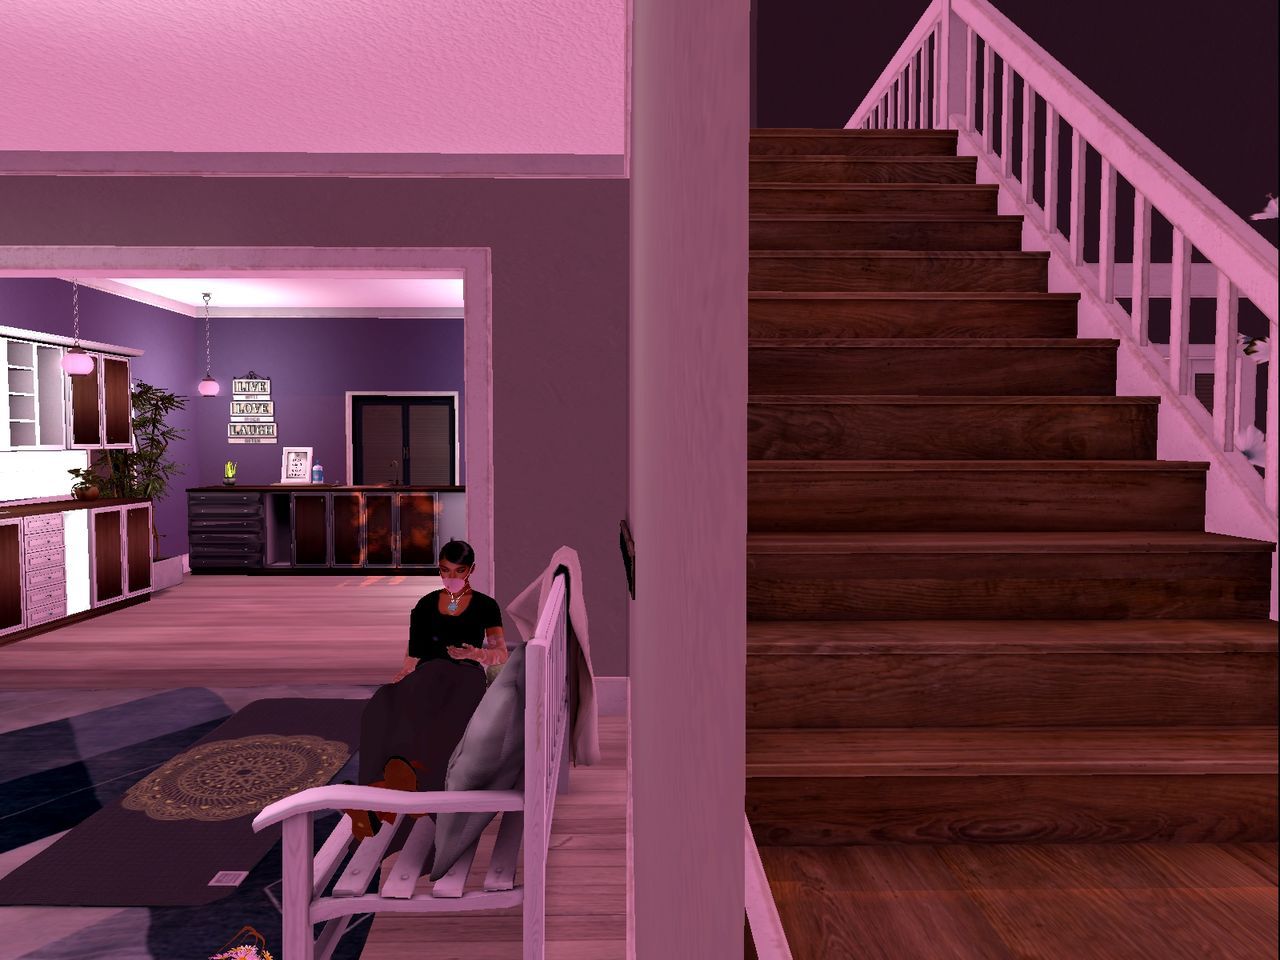 staircase, architecture, steps and staircases, stairs, adult, one person, interior design, house, room, lifestyles, sitting, women, floor, indoors, built structure, relaxation, full length, home interior, railing, furniture, pink, young adult, person, purple, night, home